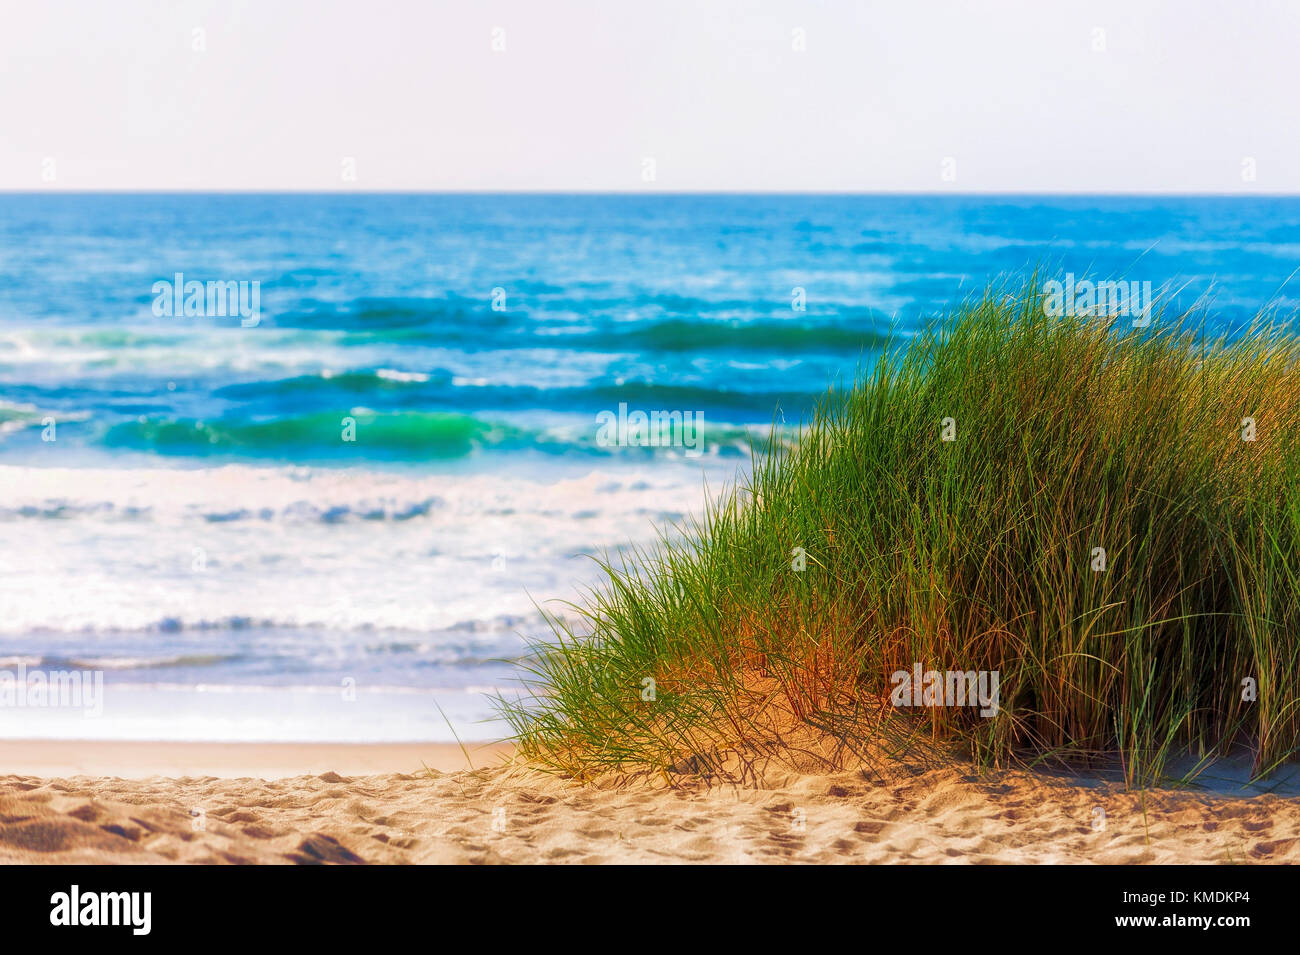 A mound of grass on a sandy beach with waves rolling in from the sea in the background Stock Photo